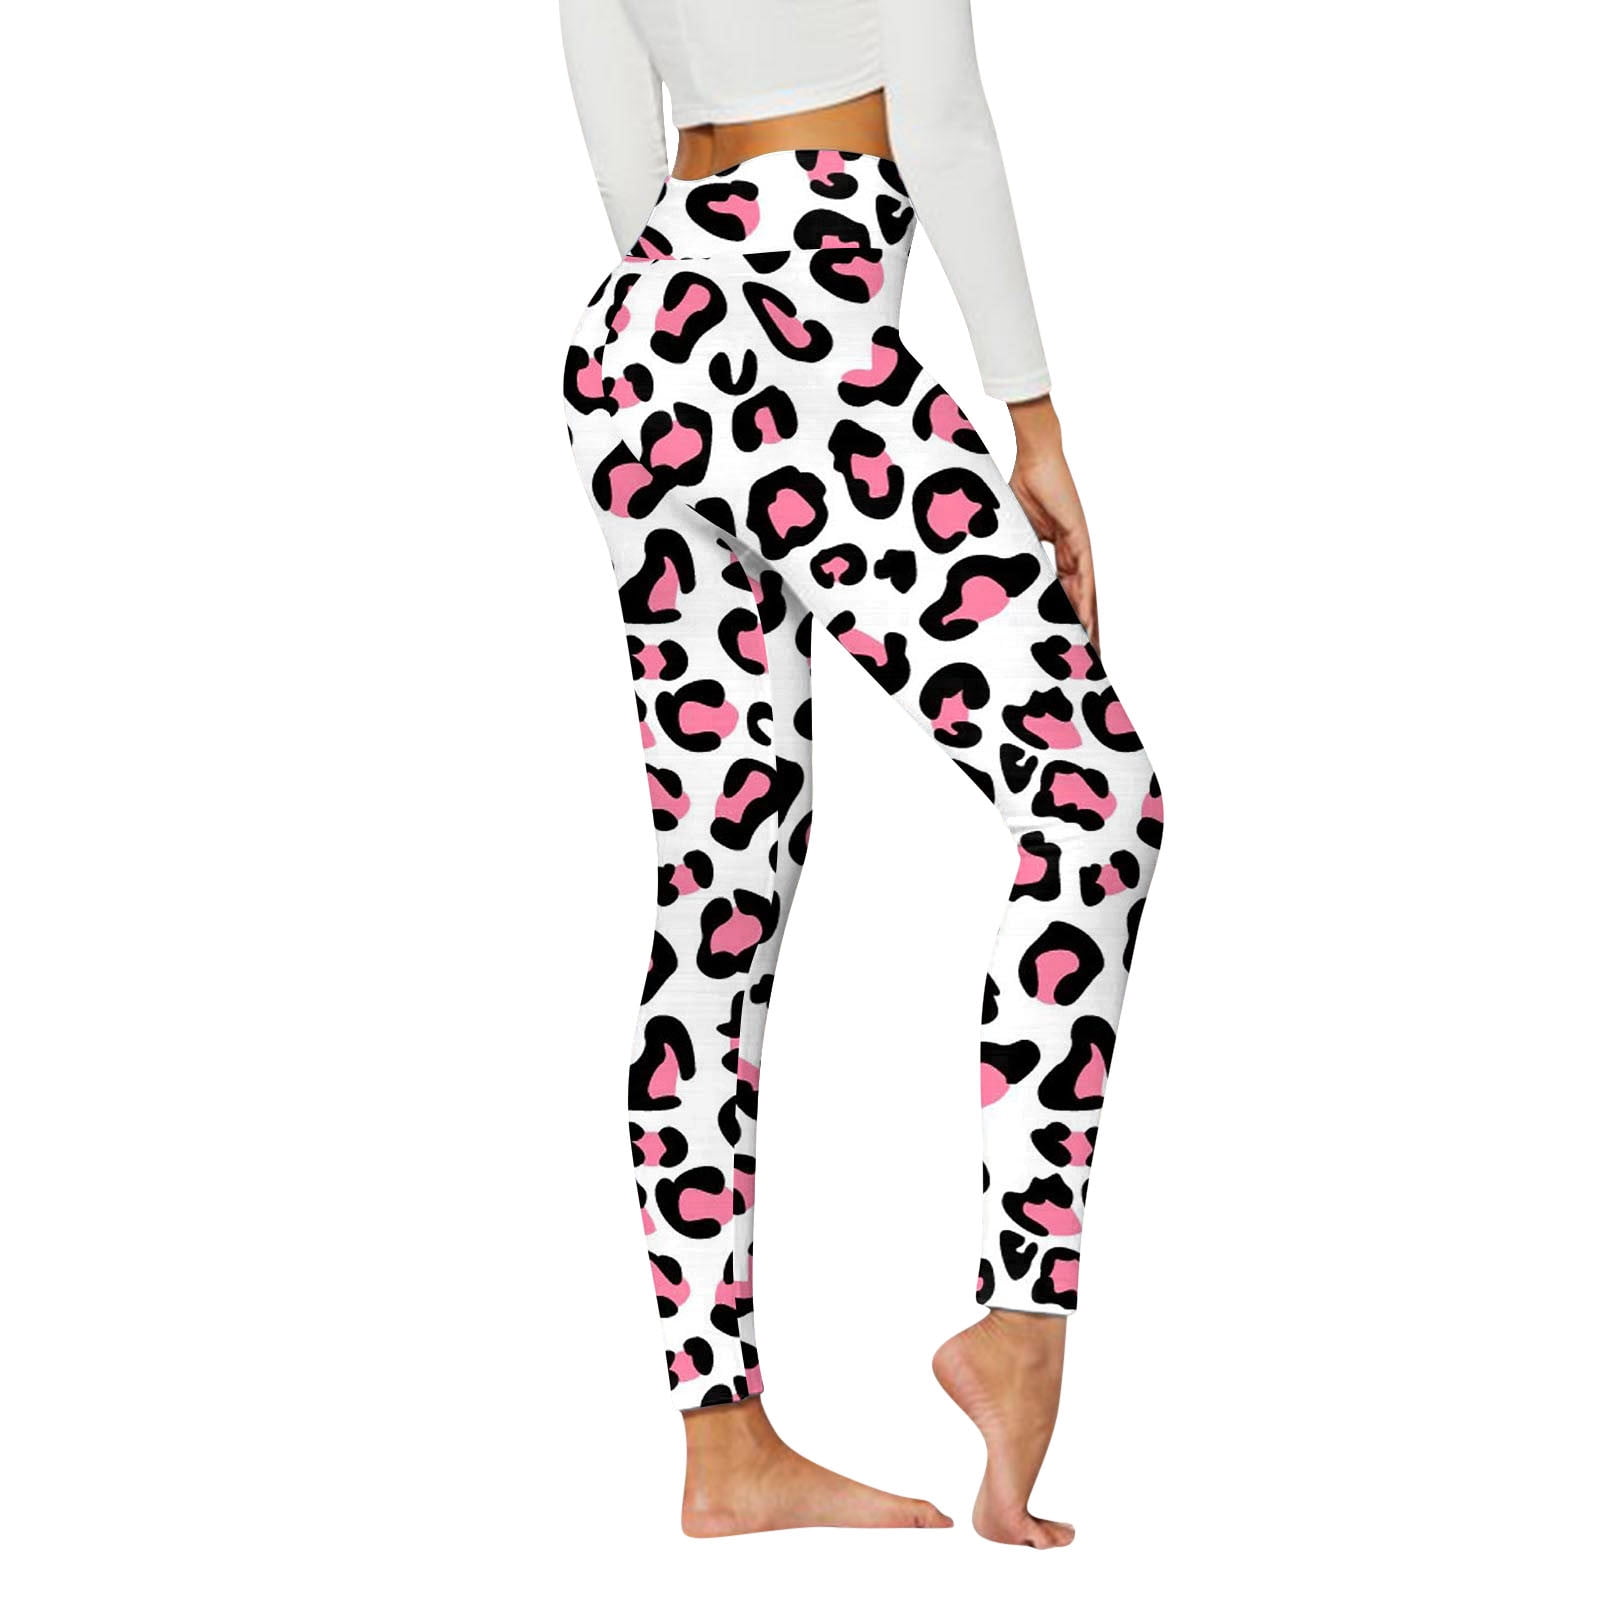 kpoplk Leggings Women, Lined Winter Warm Leggings for Women Thick Thermal  Tights(Hot Pink,L) 